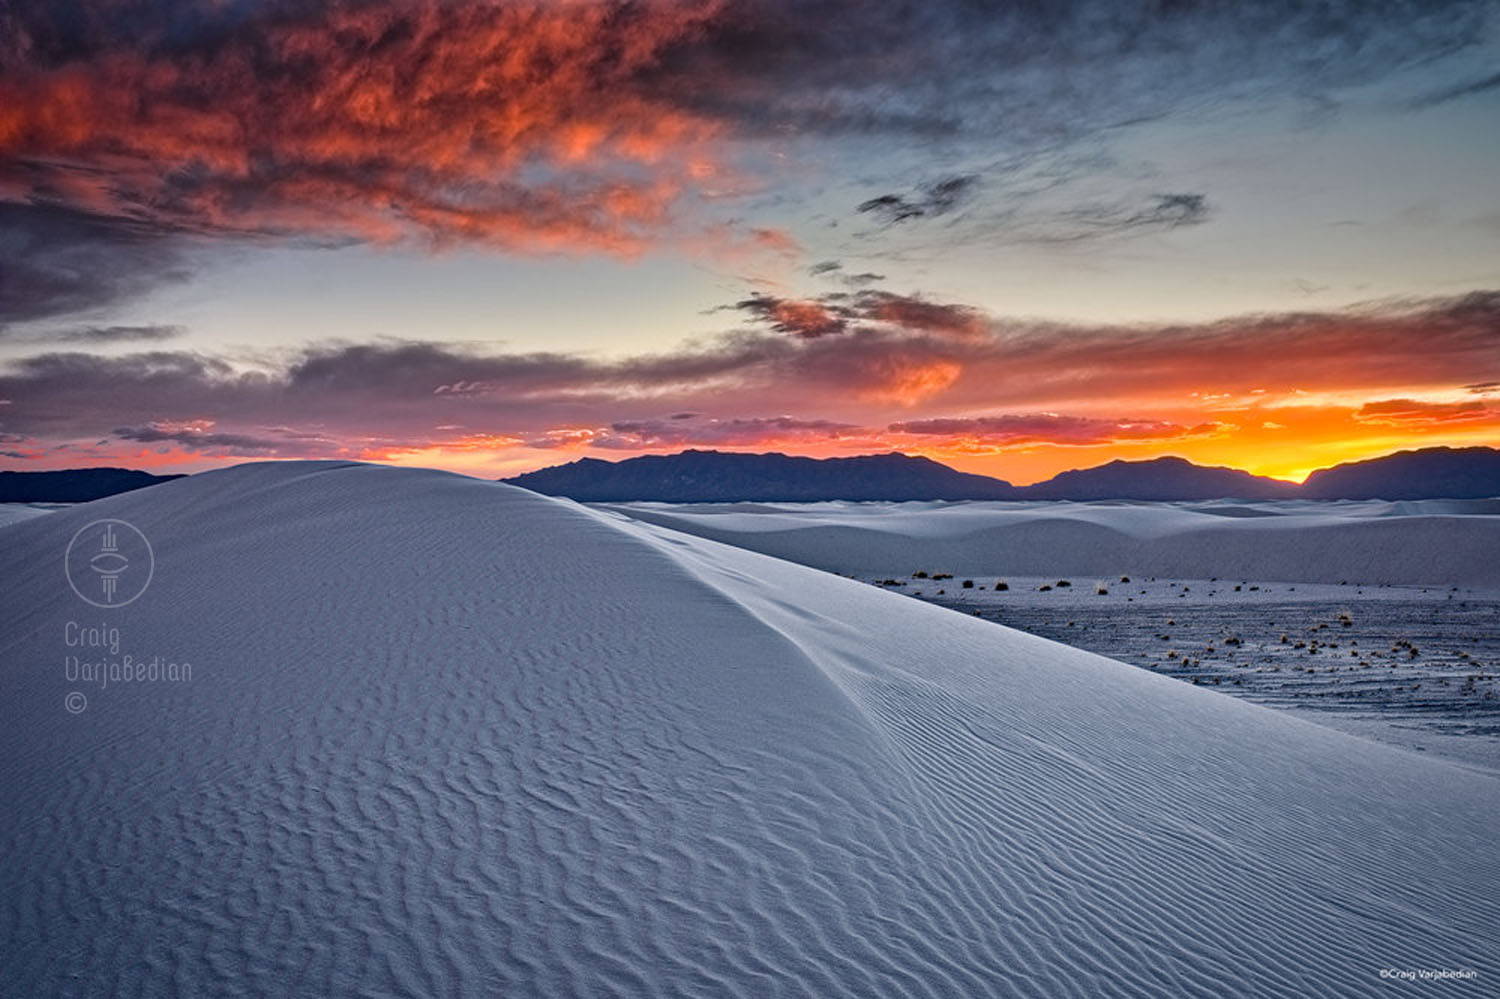 The Great White Sands: Photographing Autumn at White Sands National Monument, Santa Fe, New Mexico, United States